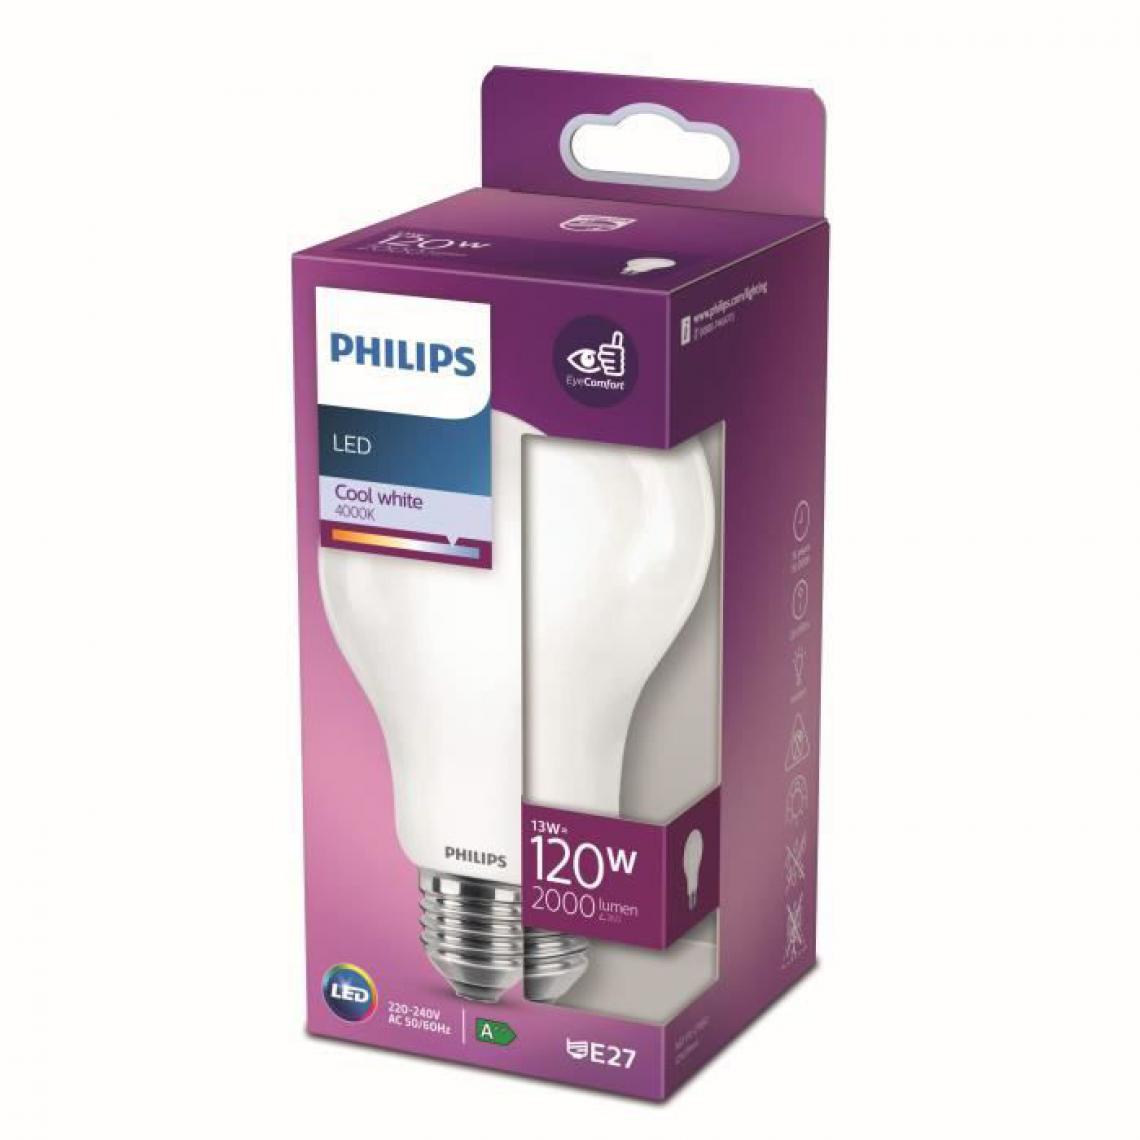 Philips - Philips Ampoule LED Equivalent 120W E27 Blanc froid Non Dimmable, verre - Ampoules LED